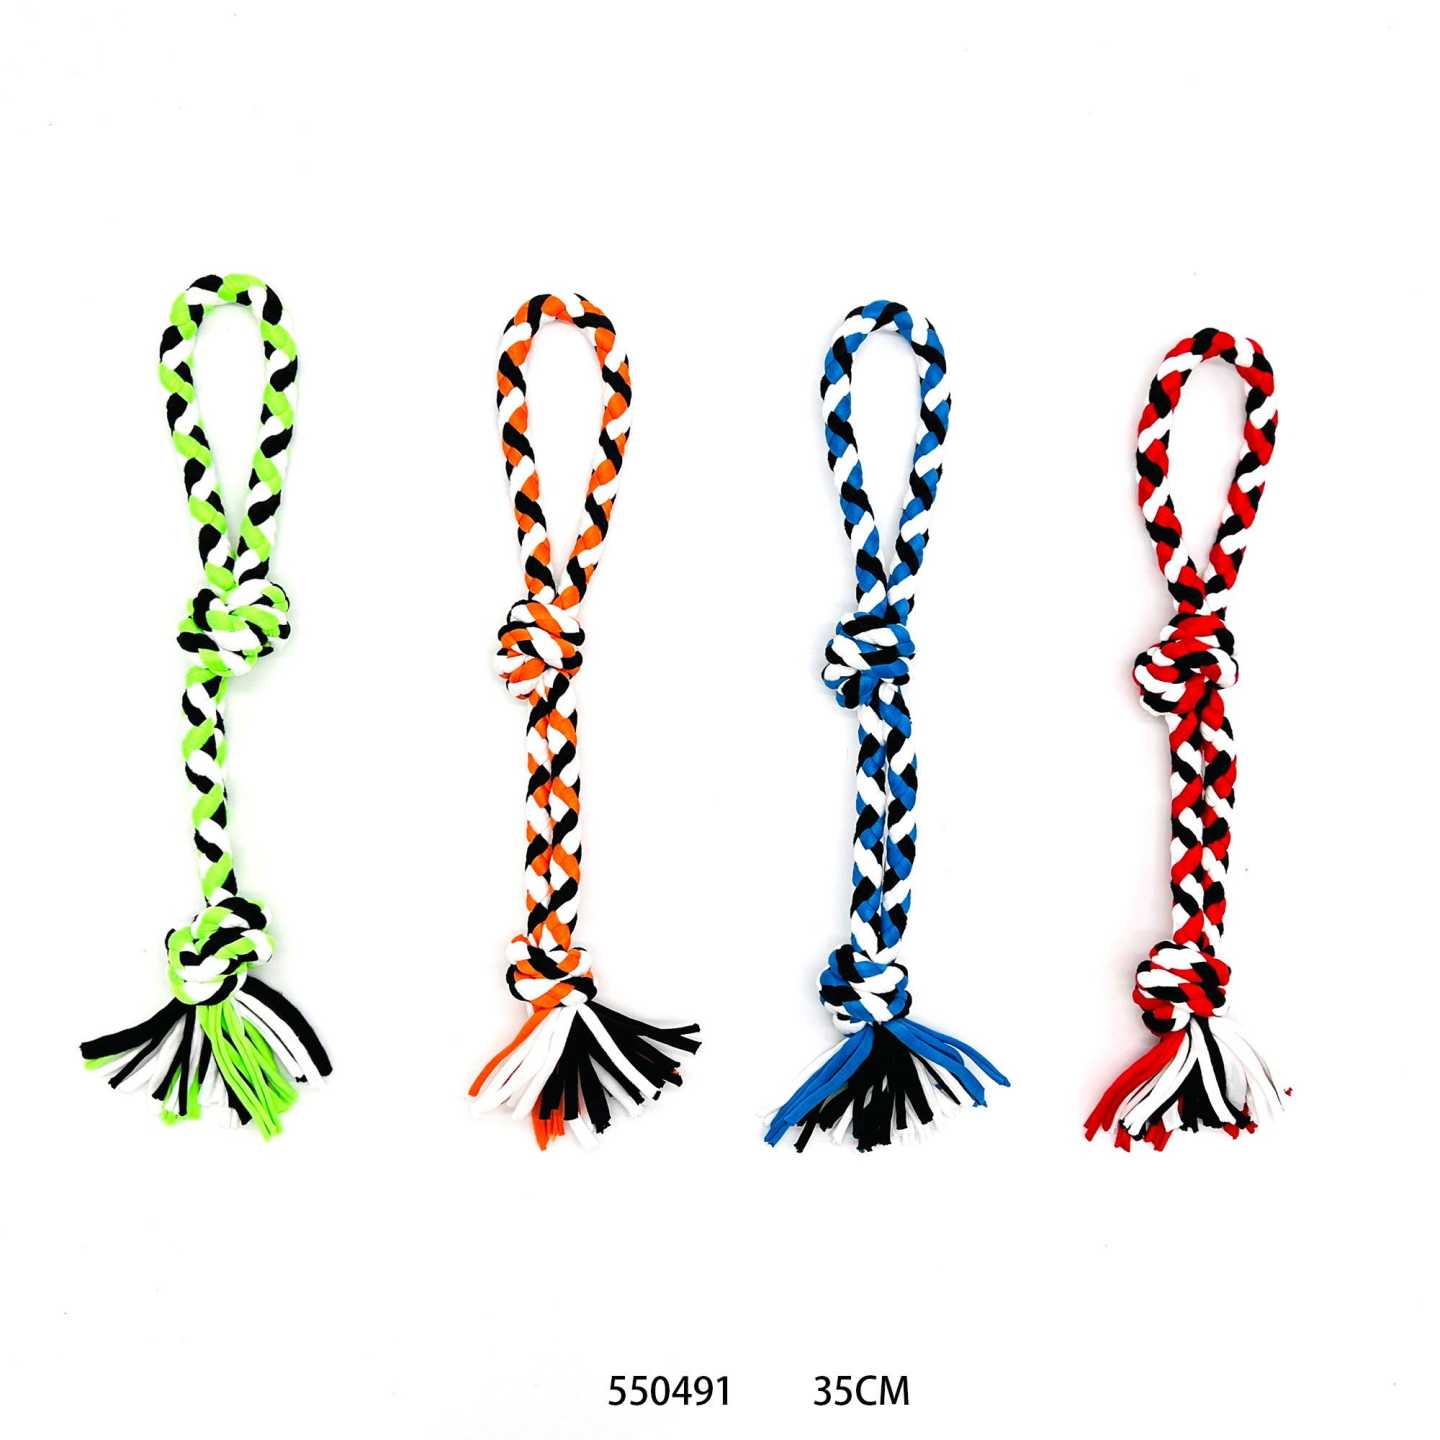 Fabric dog toy rope with knots - 35cm - 550491